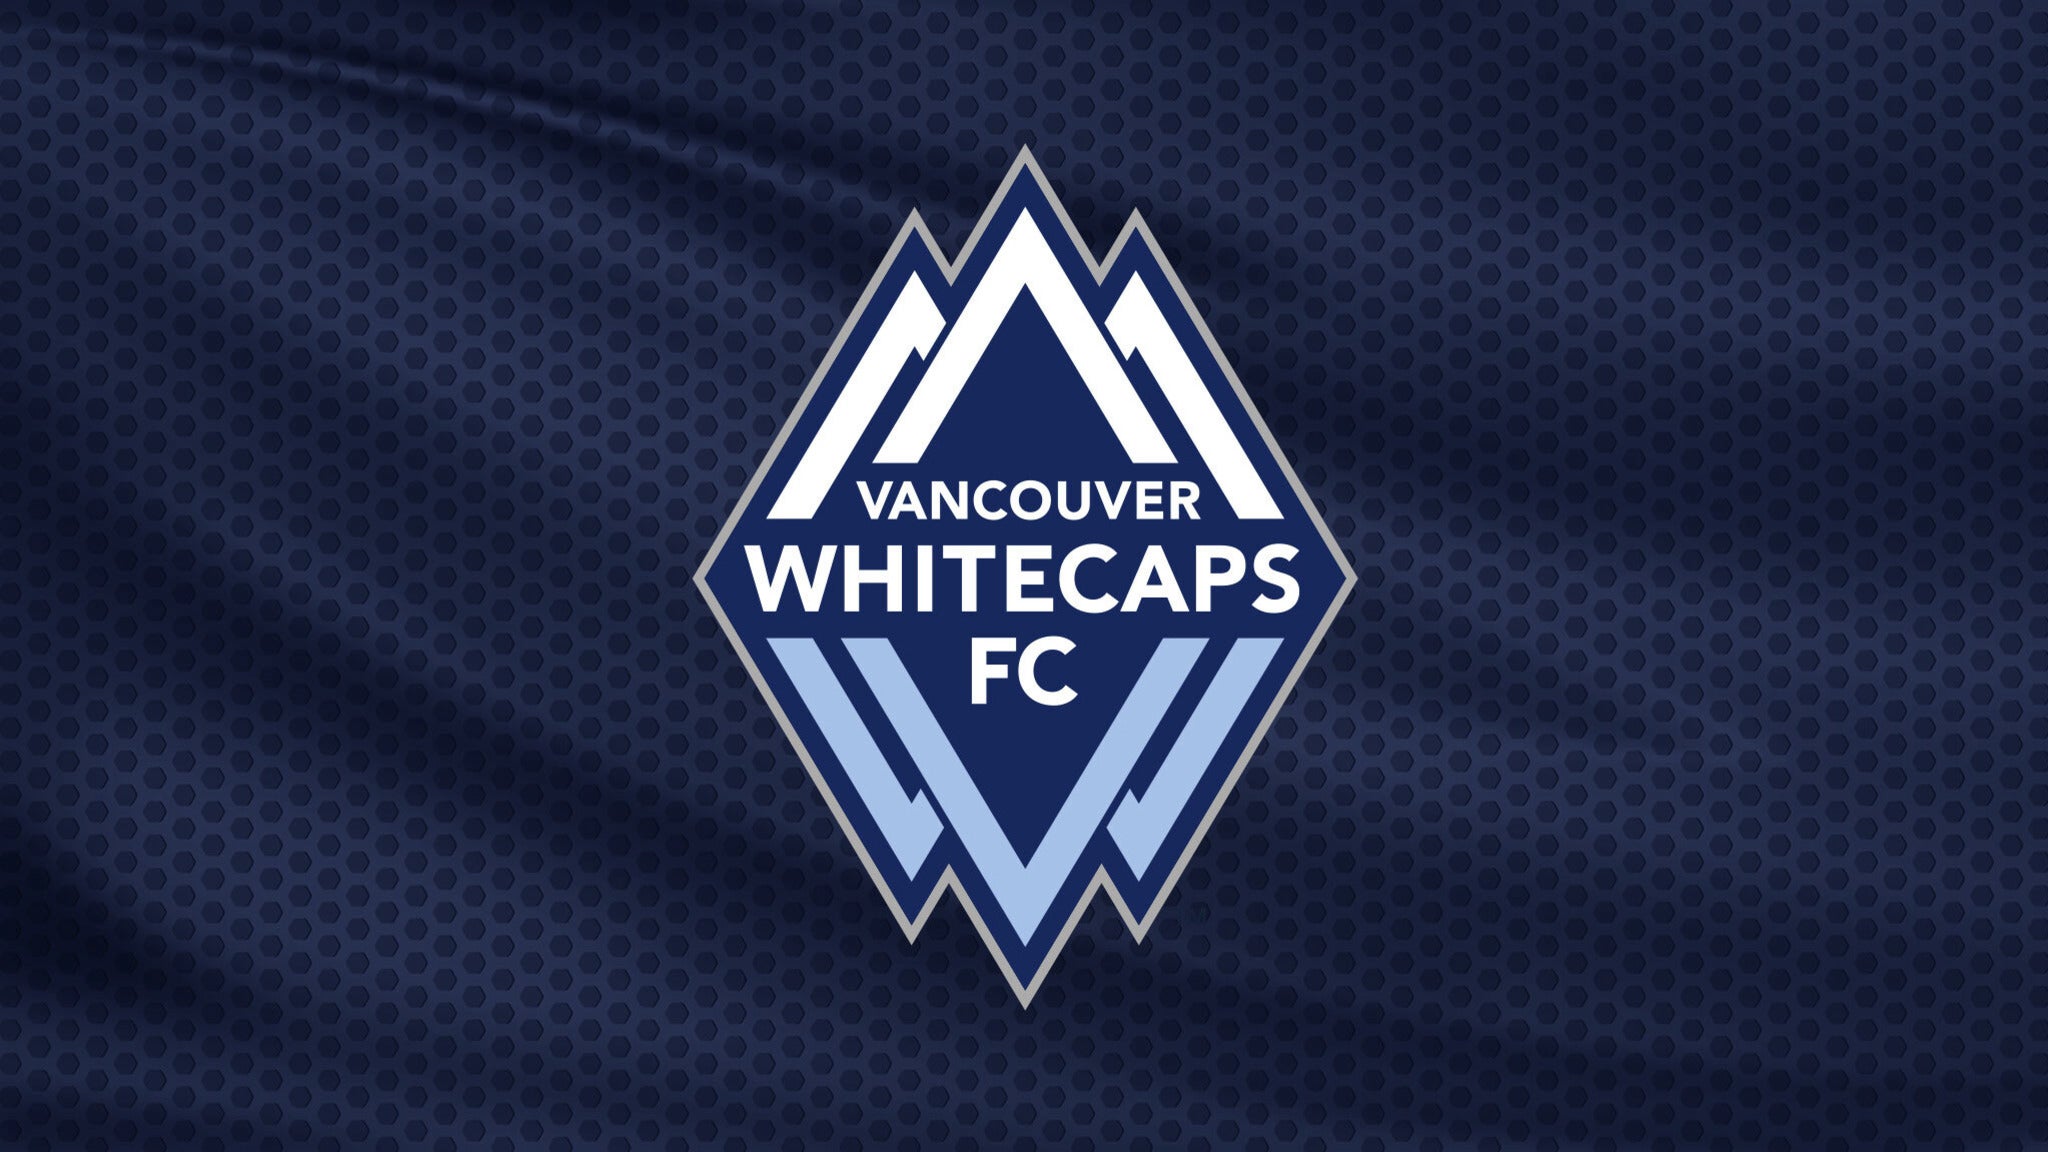 Vancouver Whitecaps FC vs. Portland Timbers in Vancouver promo photo for Exclusive Vancouver Whitecaps FC presale offer code